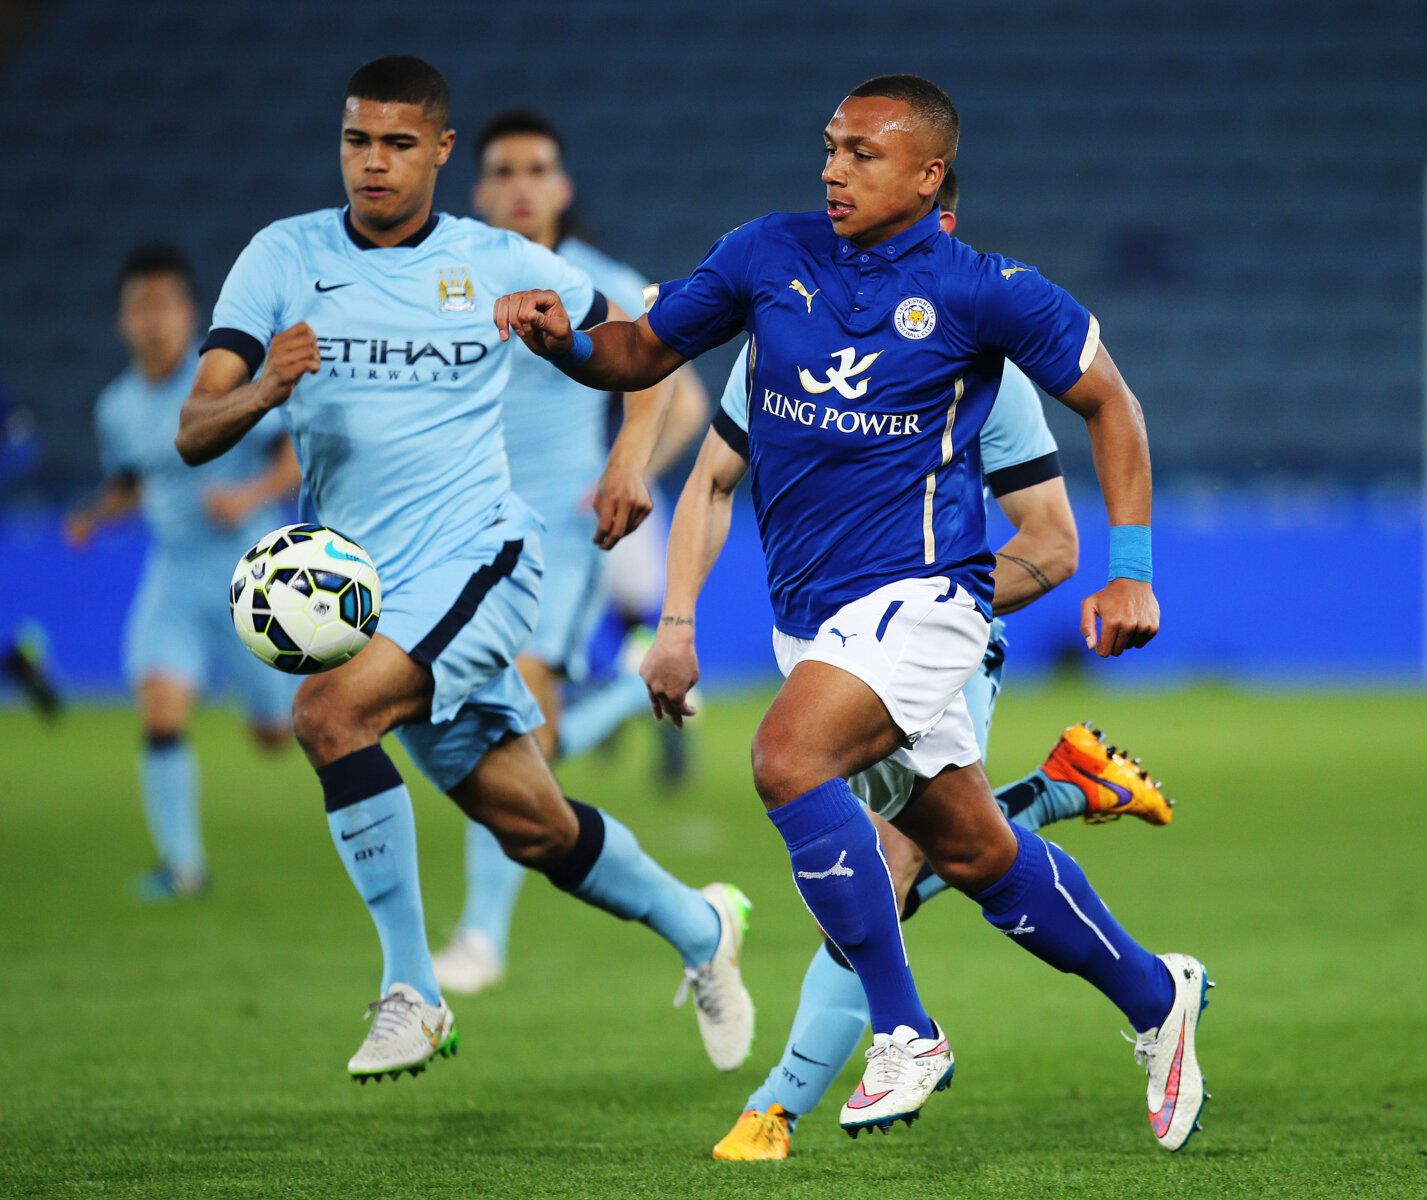 Football - Leicester City v Manchester City - FA Youth Cup Semi Final Second Leg - King Power Stadium - 8/4/15 
Leicester's Layton Ndukwu and Manchester City's Cameron Humphreys Grant 
Mandatory Credit: Action Images / Paul Childs 
Livepic 
EDITORIAL USE ONLY.